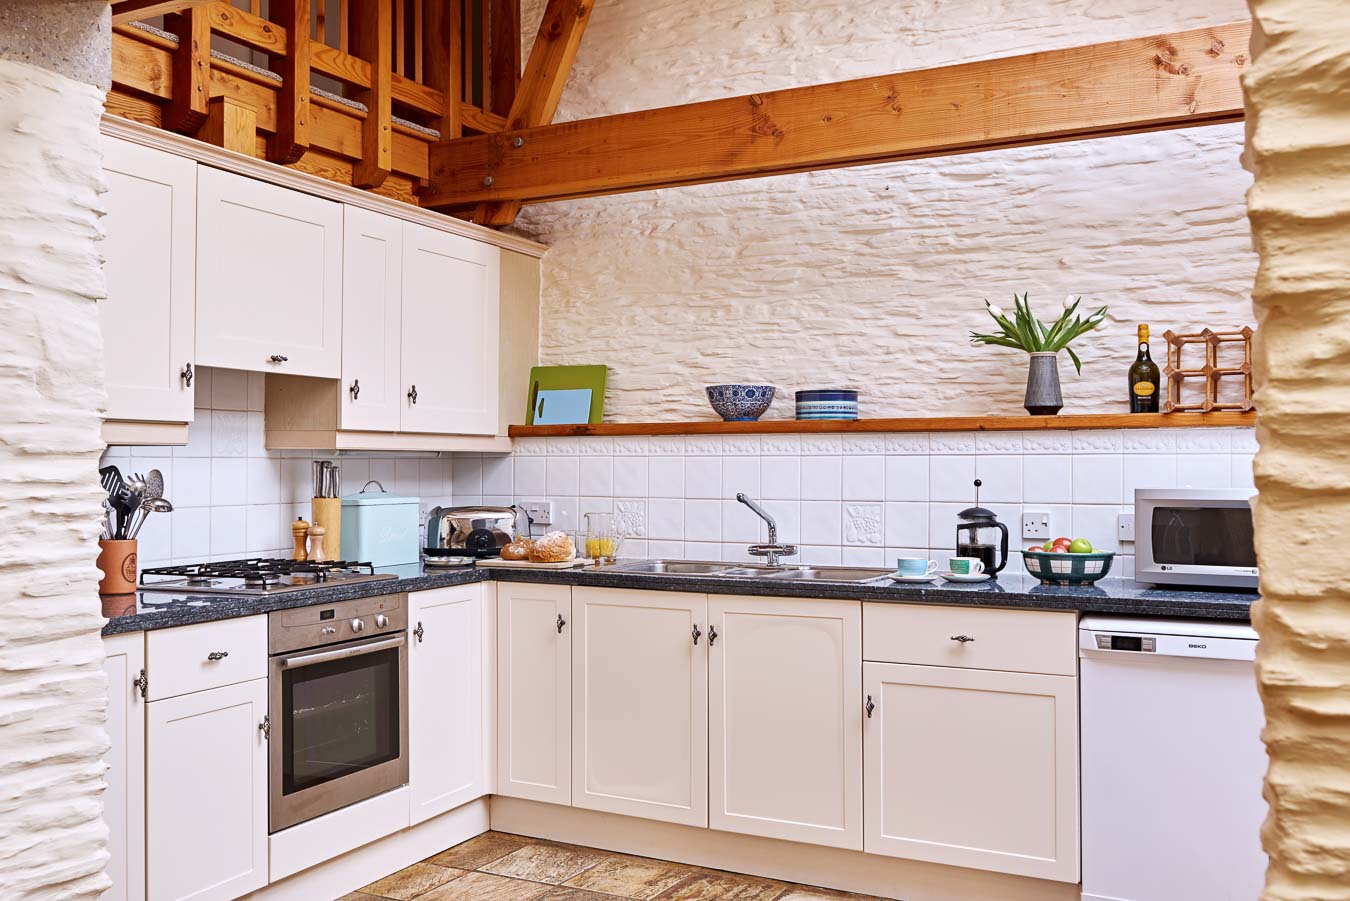 The shaker style kitchen in the Linhay cottage with black granite work tops and heated tiled floor at Flear Farm. 